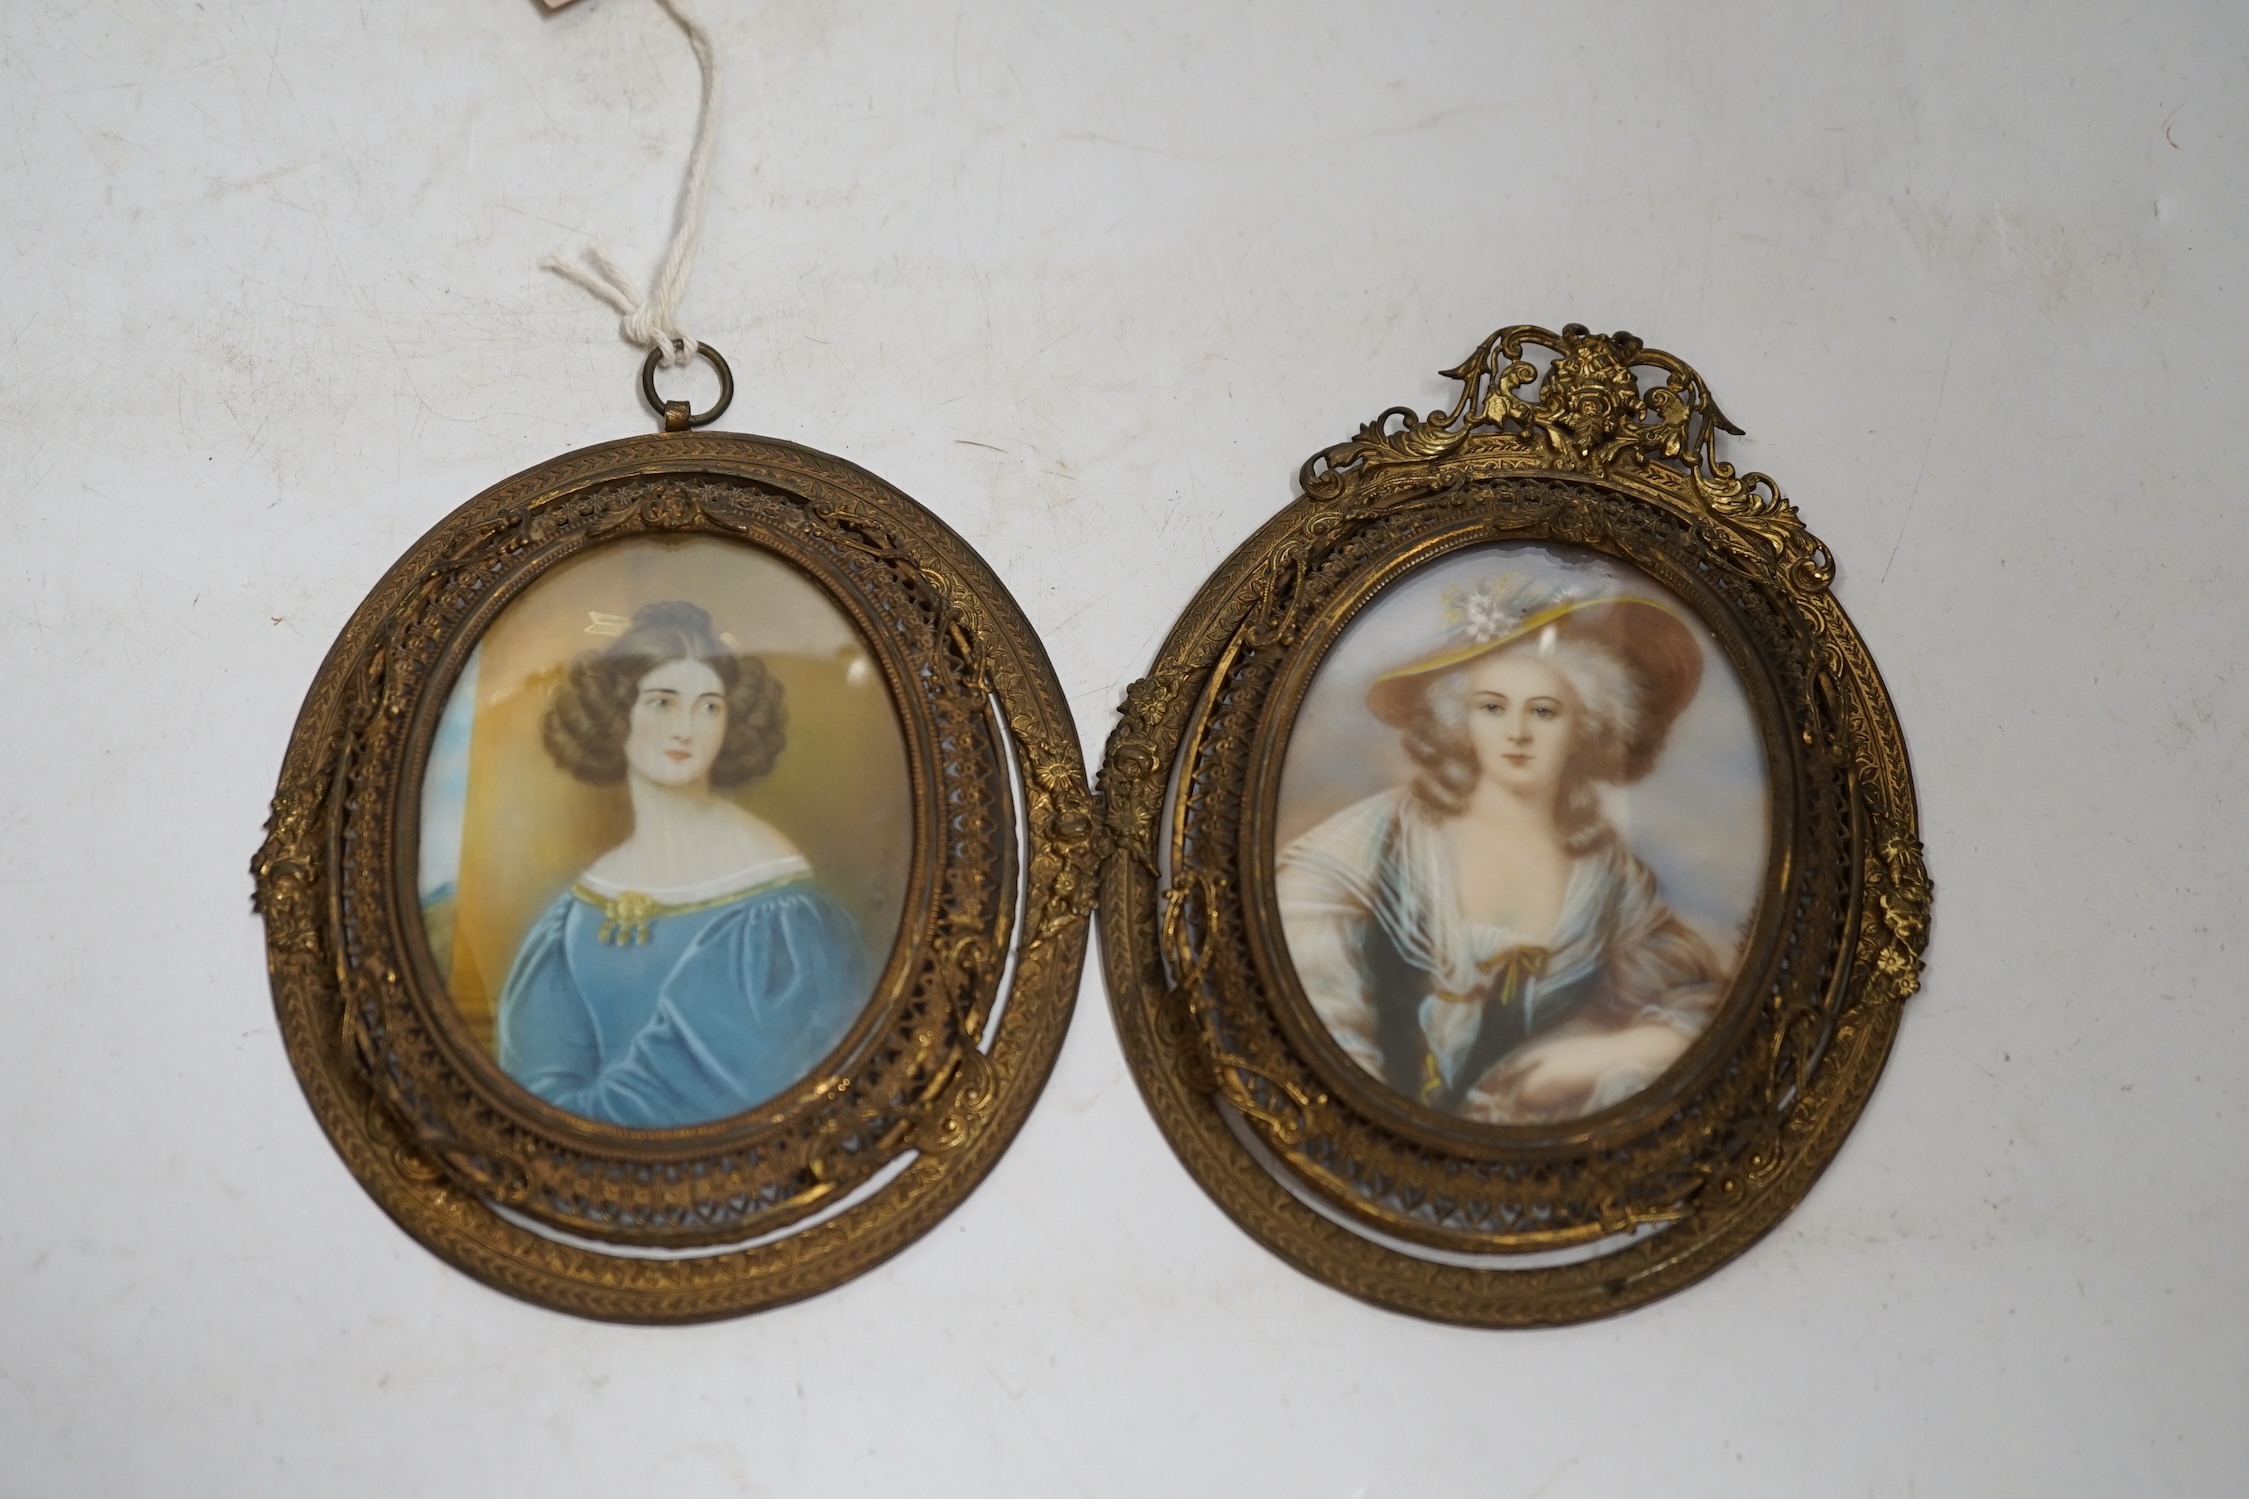 J Steiler, miniature on ivory, portrait of Anna R Kaula, and another Le Beau, c.1900, in pierced gilt-metal frames. CITES Submission references G2TXJBBQ & Submission reference MS6J4TYA. Condition - fair